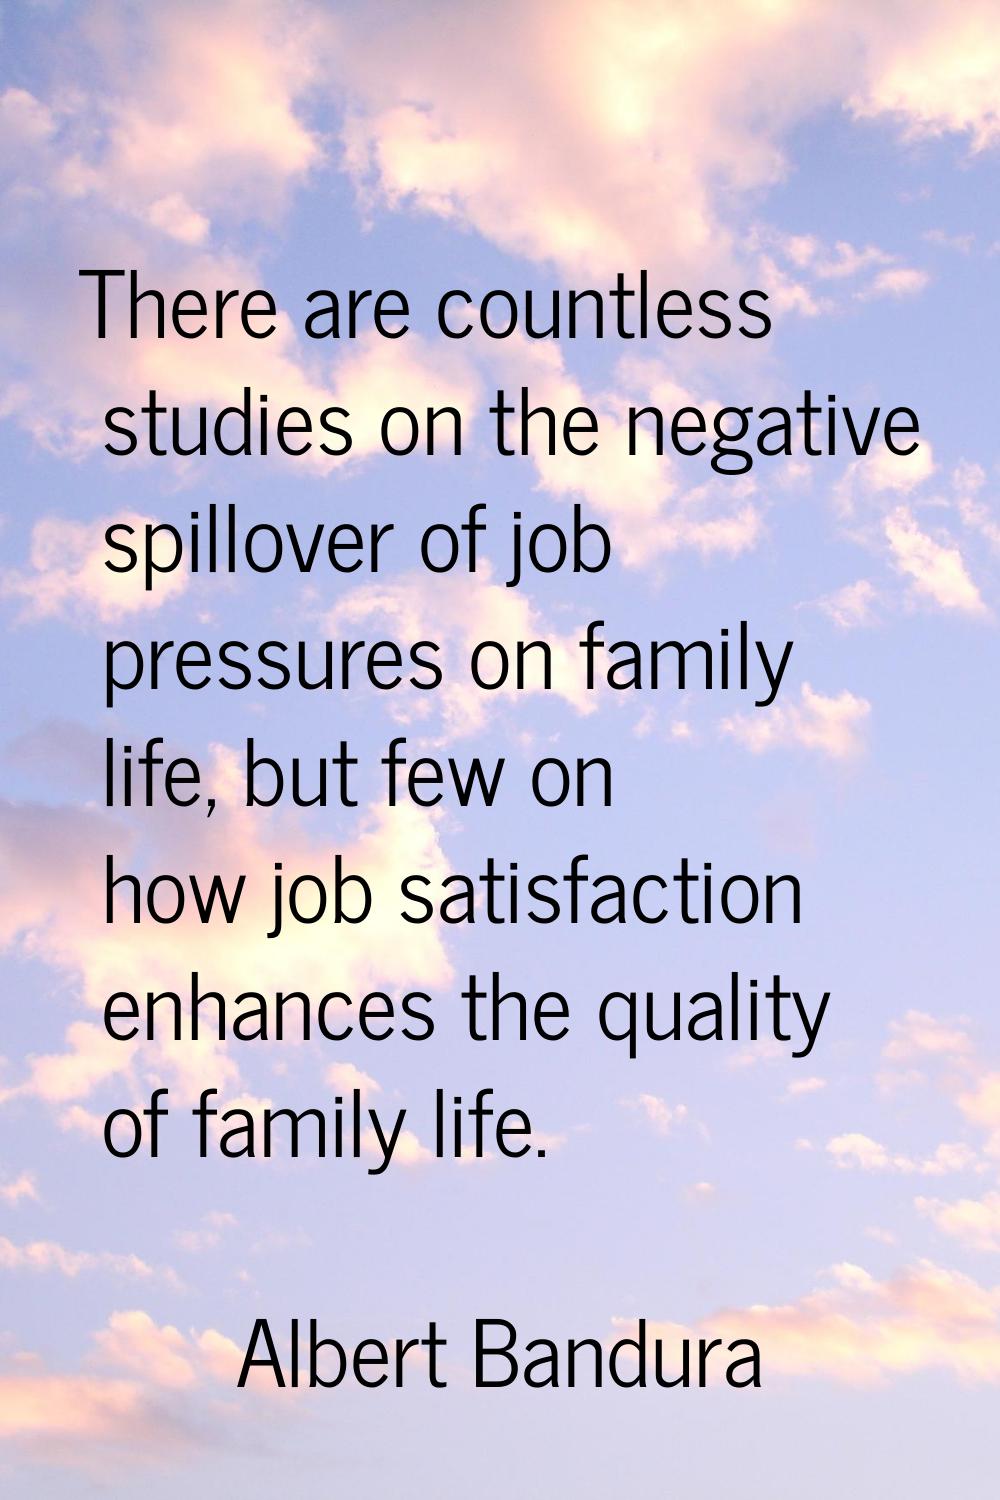 There are countless studies on the negative spillover of job pressures on family life, but few on h